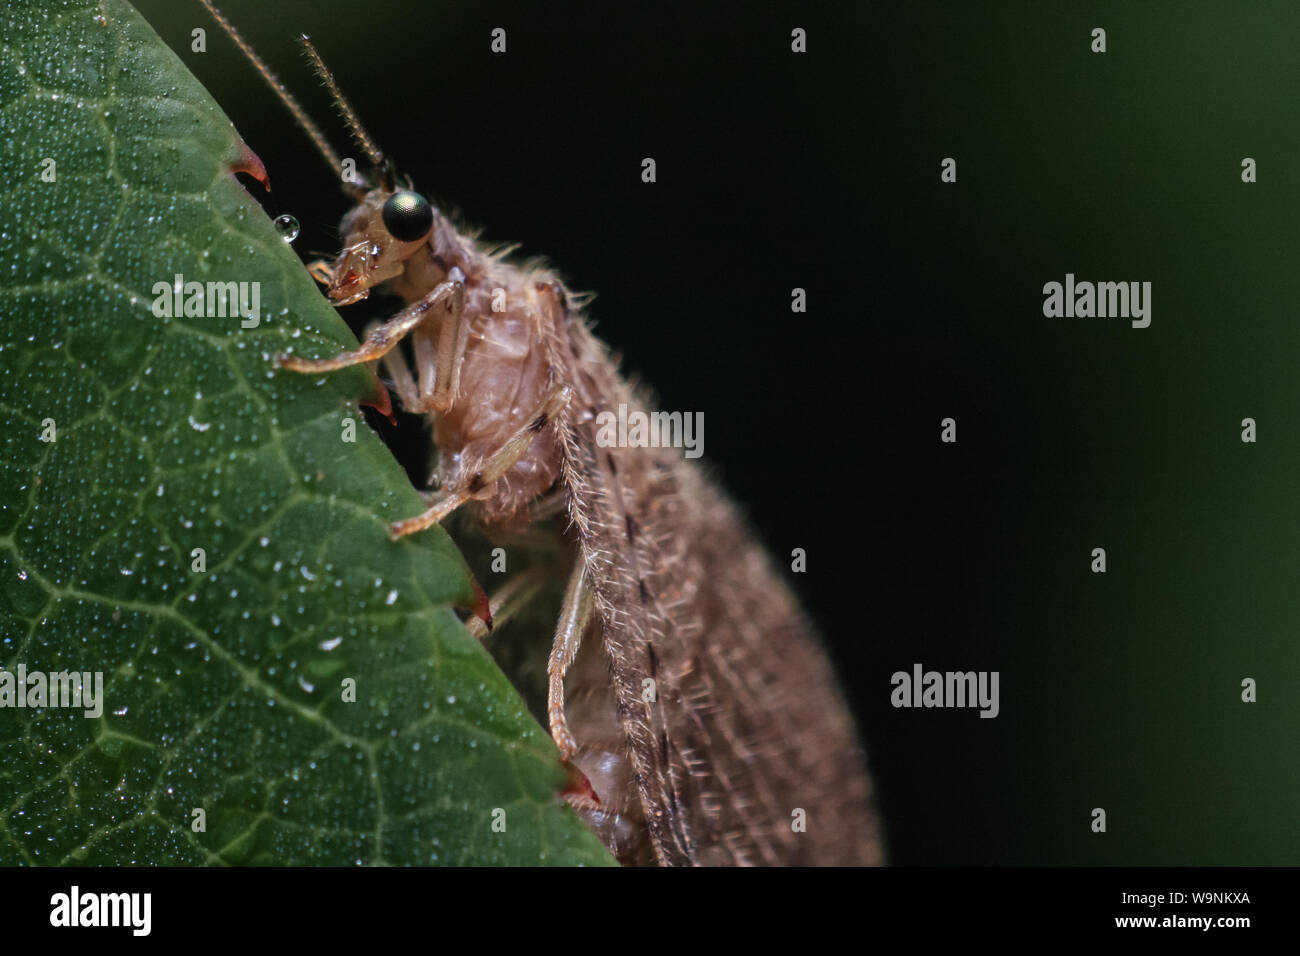 Lacewing insect on a leaf, from a tropical garden Stock Photo